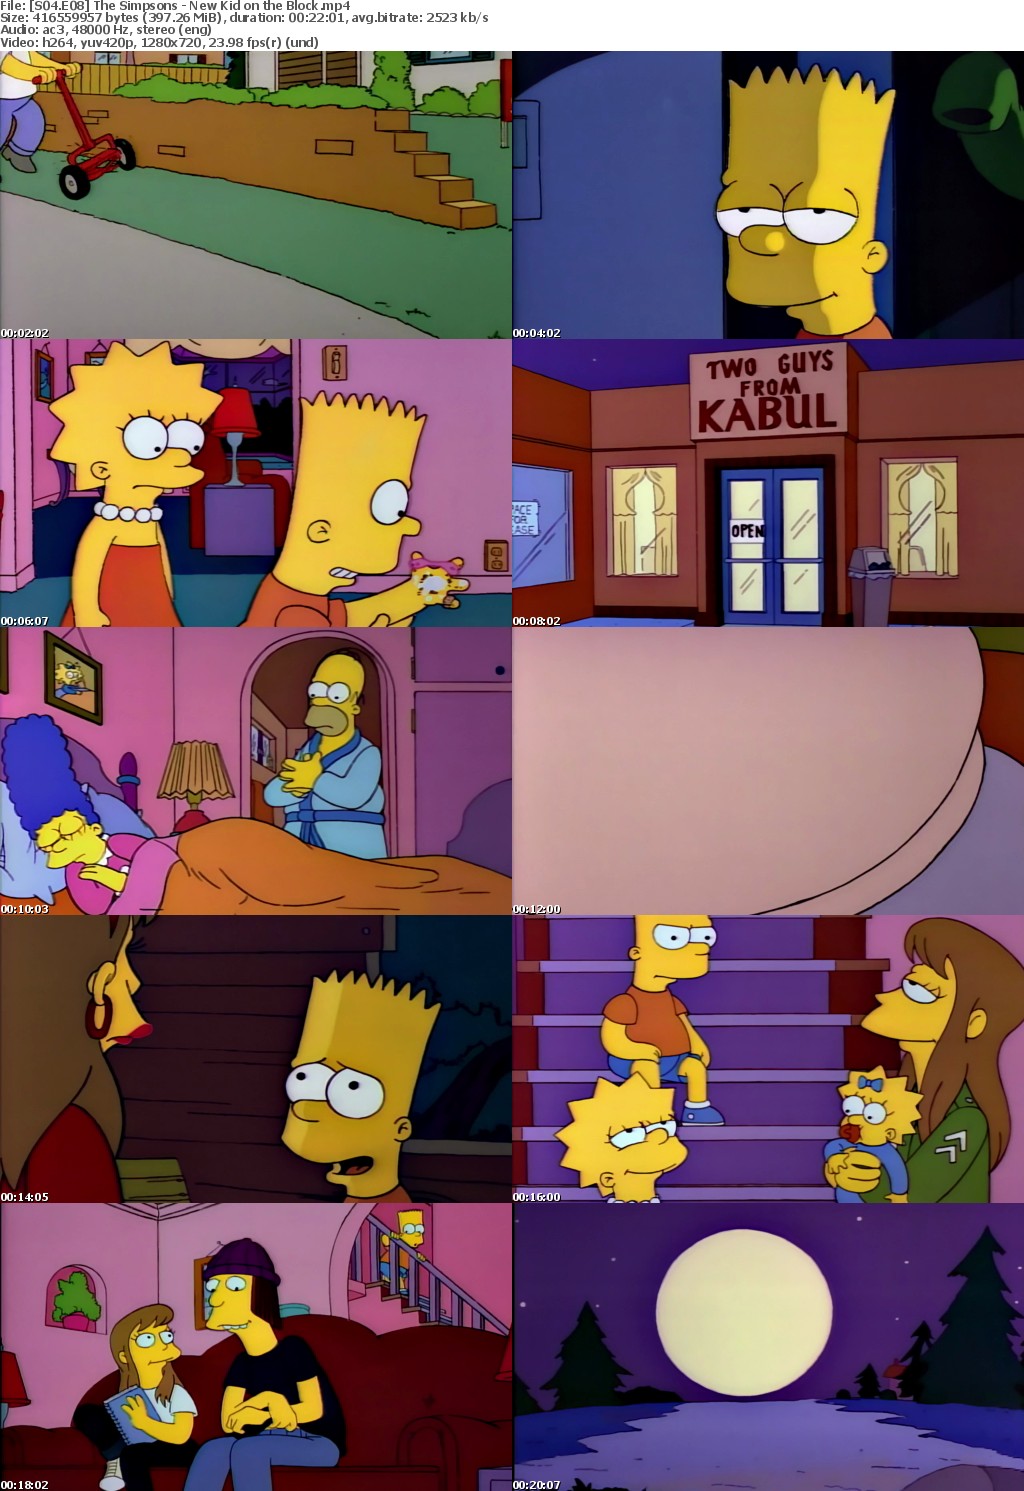 The Simpsons S4 E8 New Kid on the Block MP4 720p H264 WEBRip EzzRips